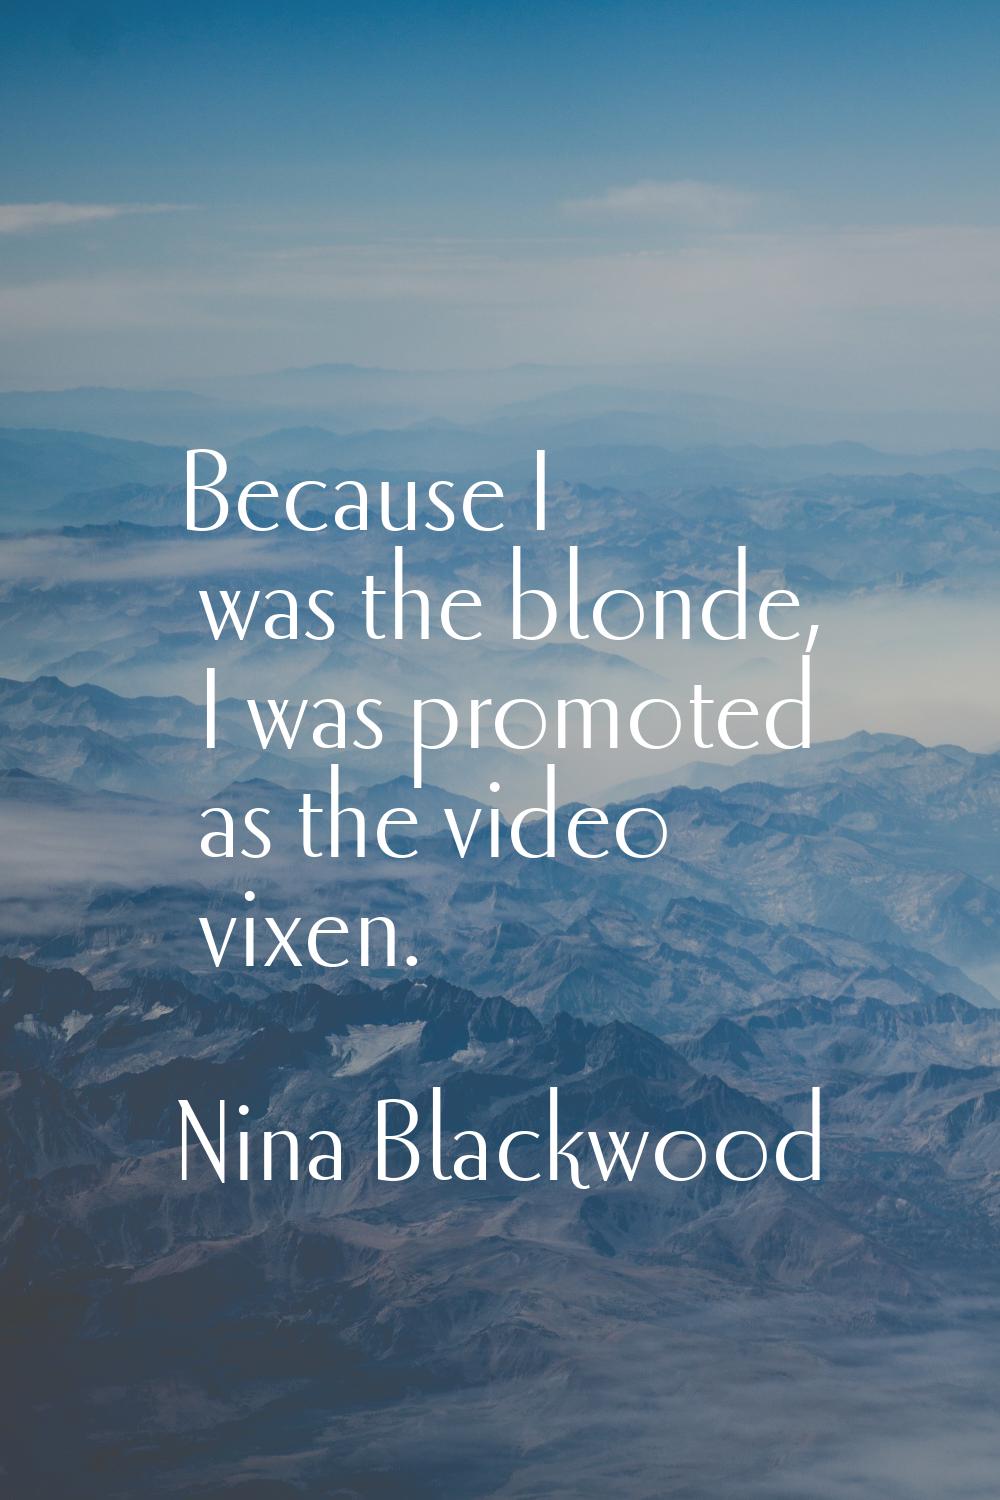 Because I was the blonde, I was promoted as the video vixen.